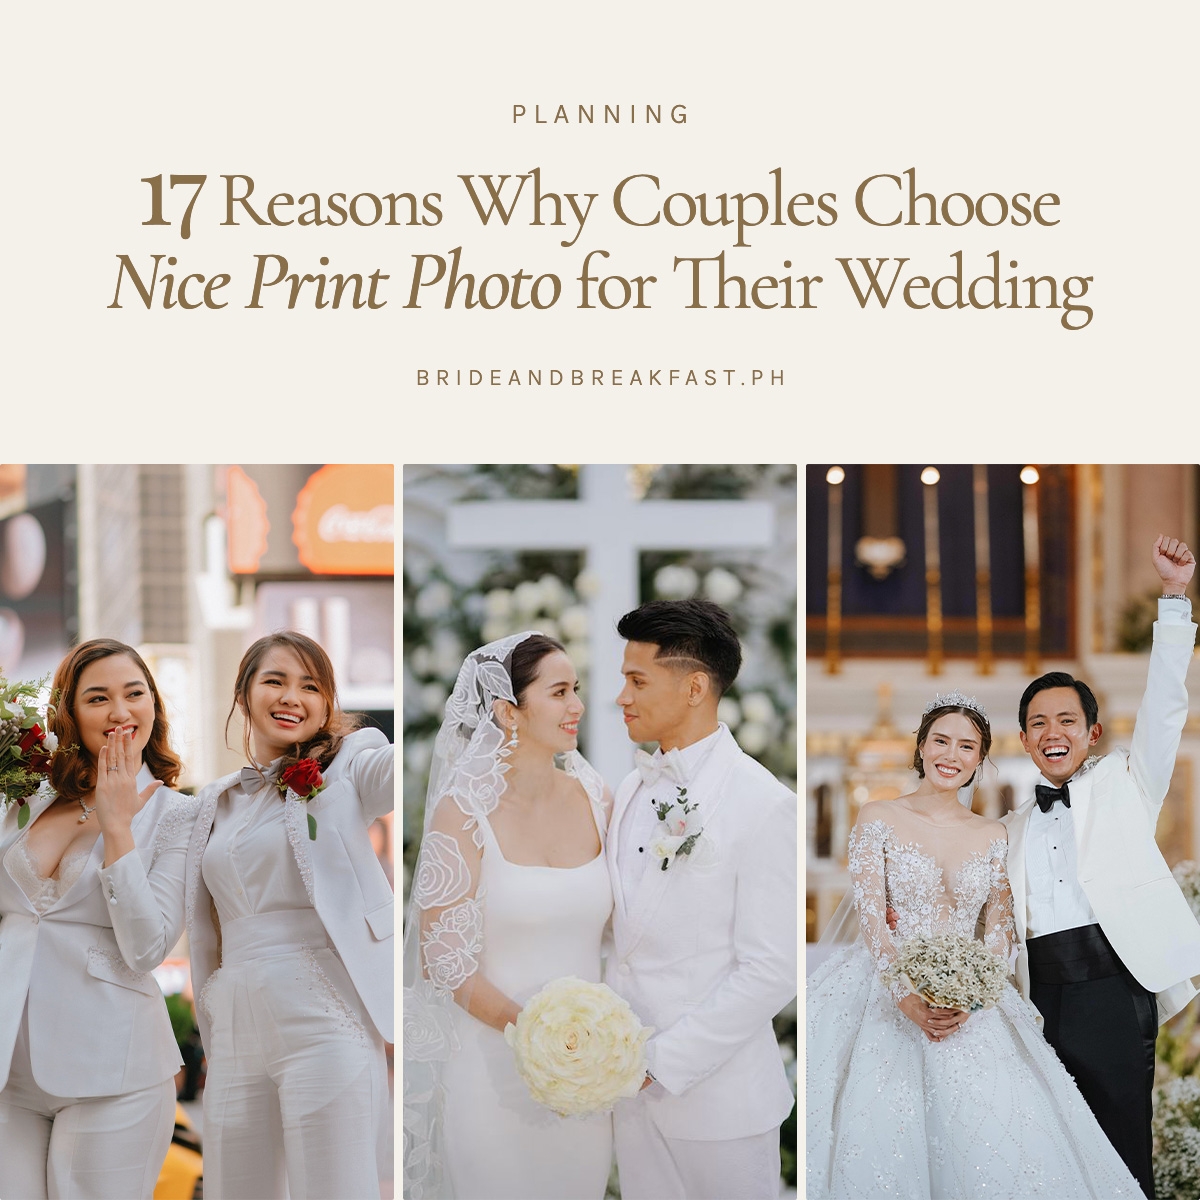 17 Reasons Why Couples Choose Nice Print Photo for Their Wedding